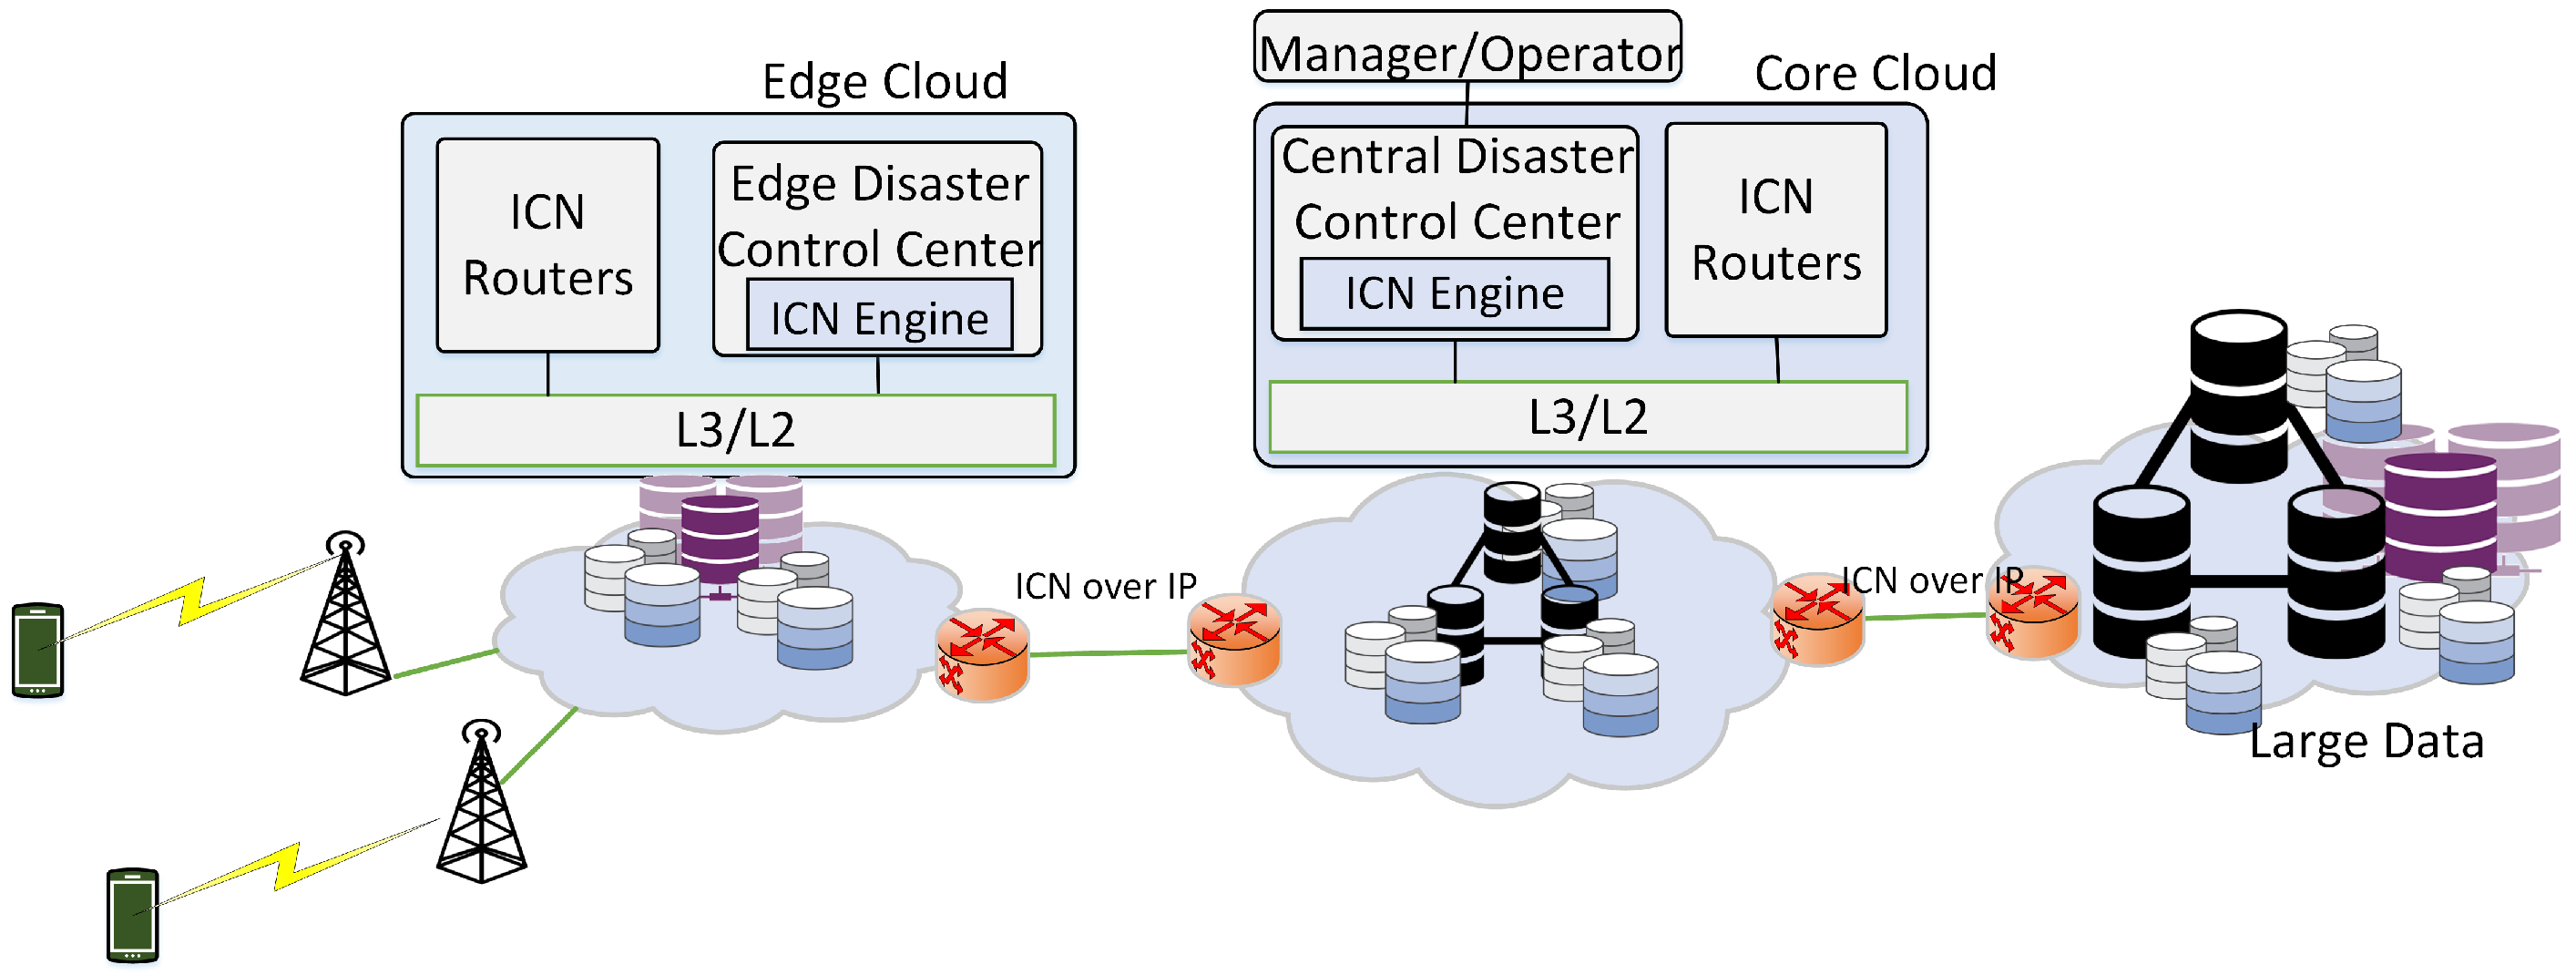 Edge Cloud Architecture For Icn Based